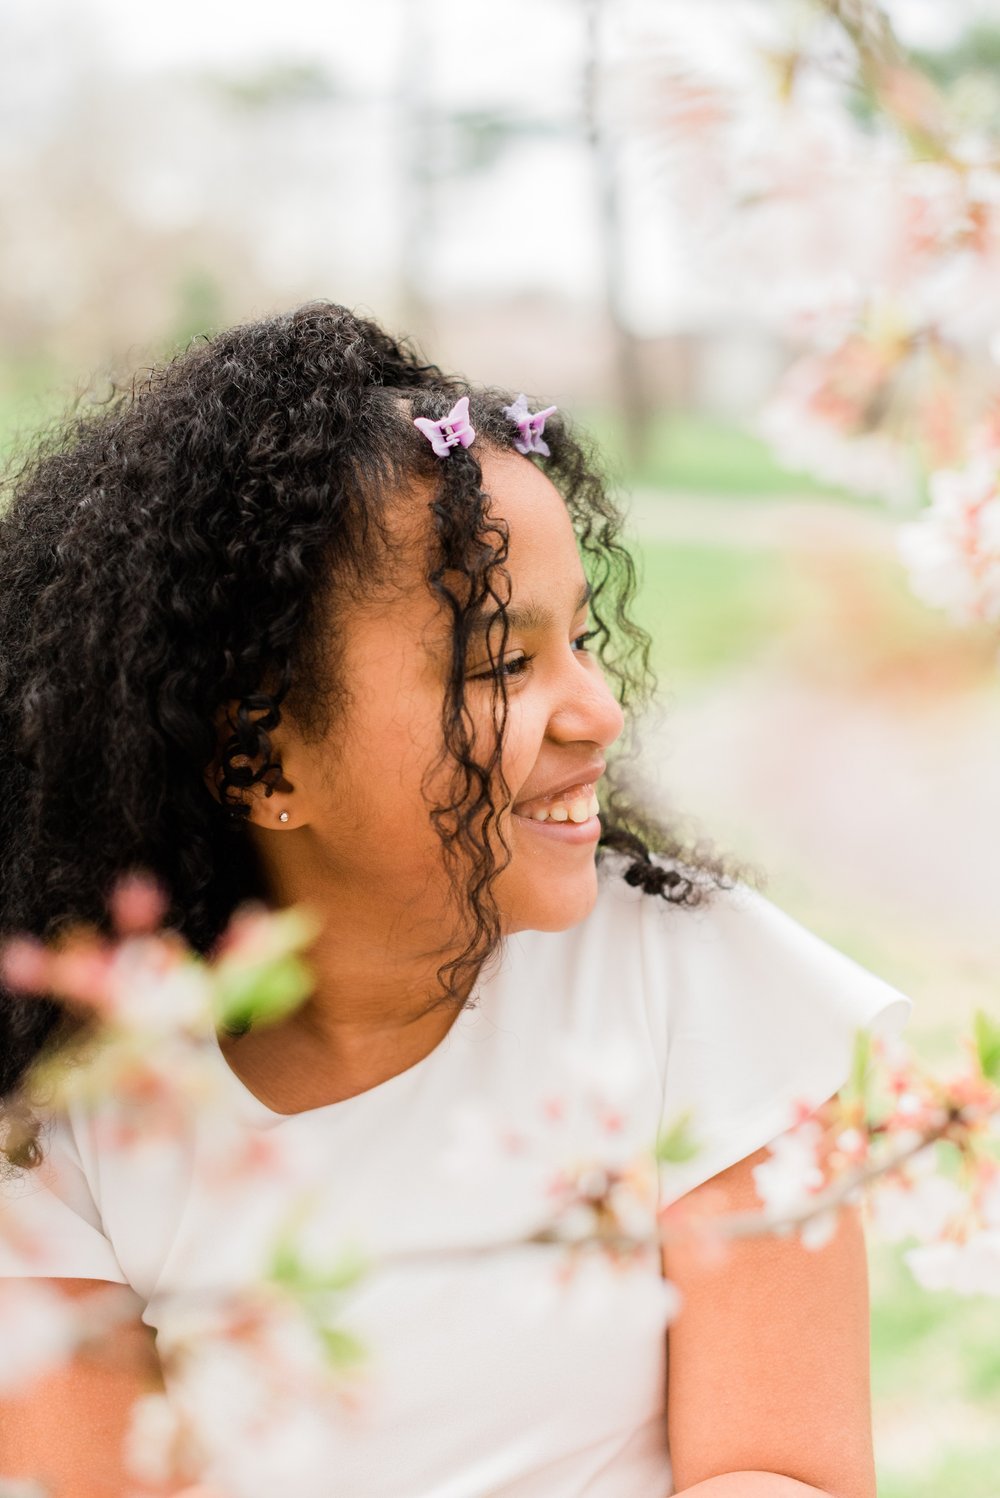  A little girl with curly black hair smiles to the side, showing her cute profile in a portrait photo captured by Peachtree City photographer, Jacquie Erickson Senoia&nbsp; Newnan&nbsp; Alpharetta Children's portraits capture their childhood #childpo